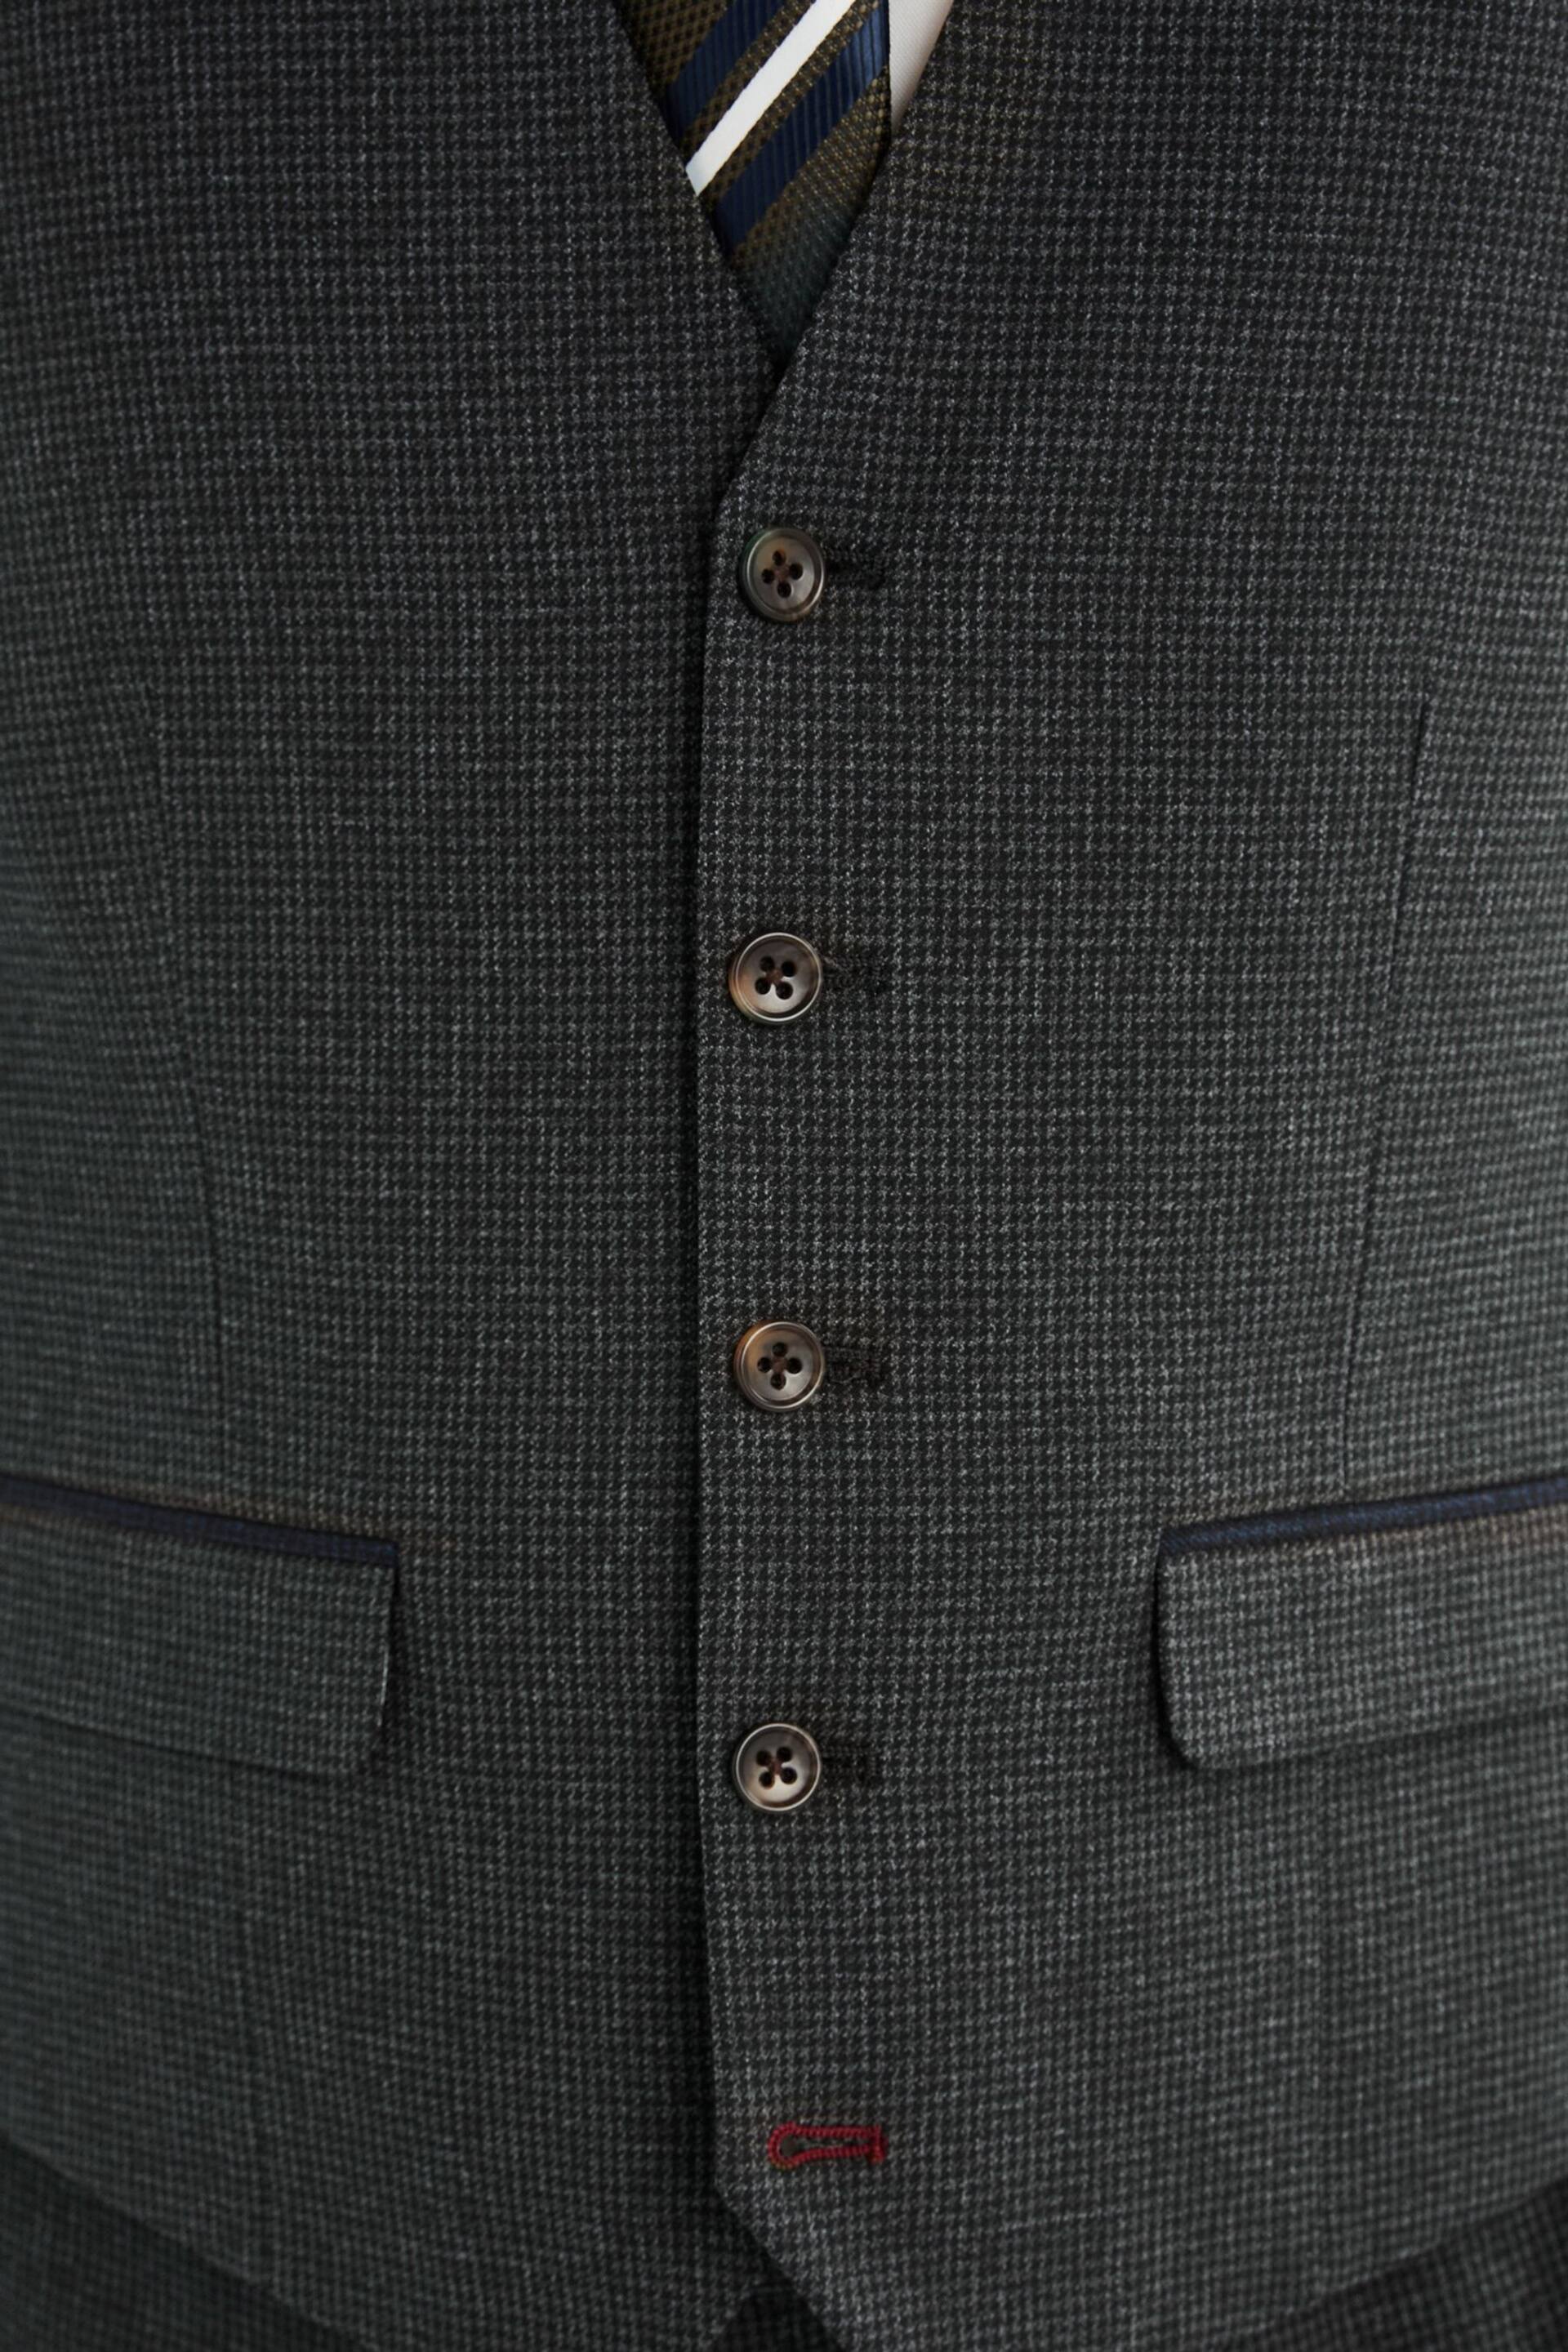 Charcoal Grey Puppytooth Fabric Suit Waistcoat - Image 4 of 11